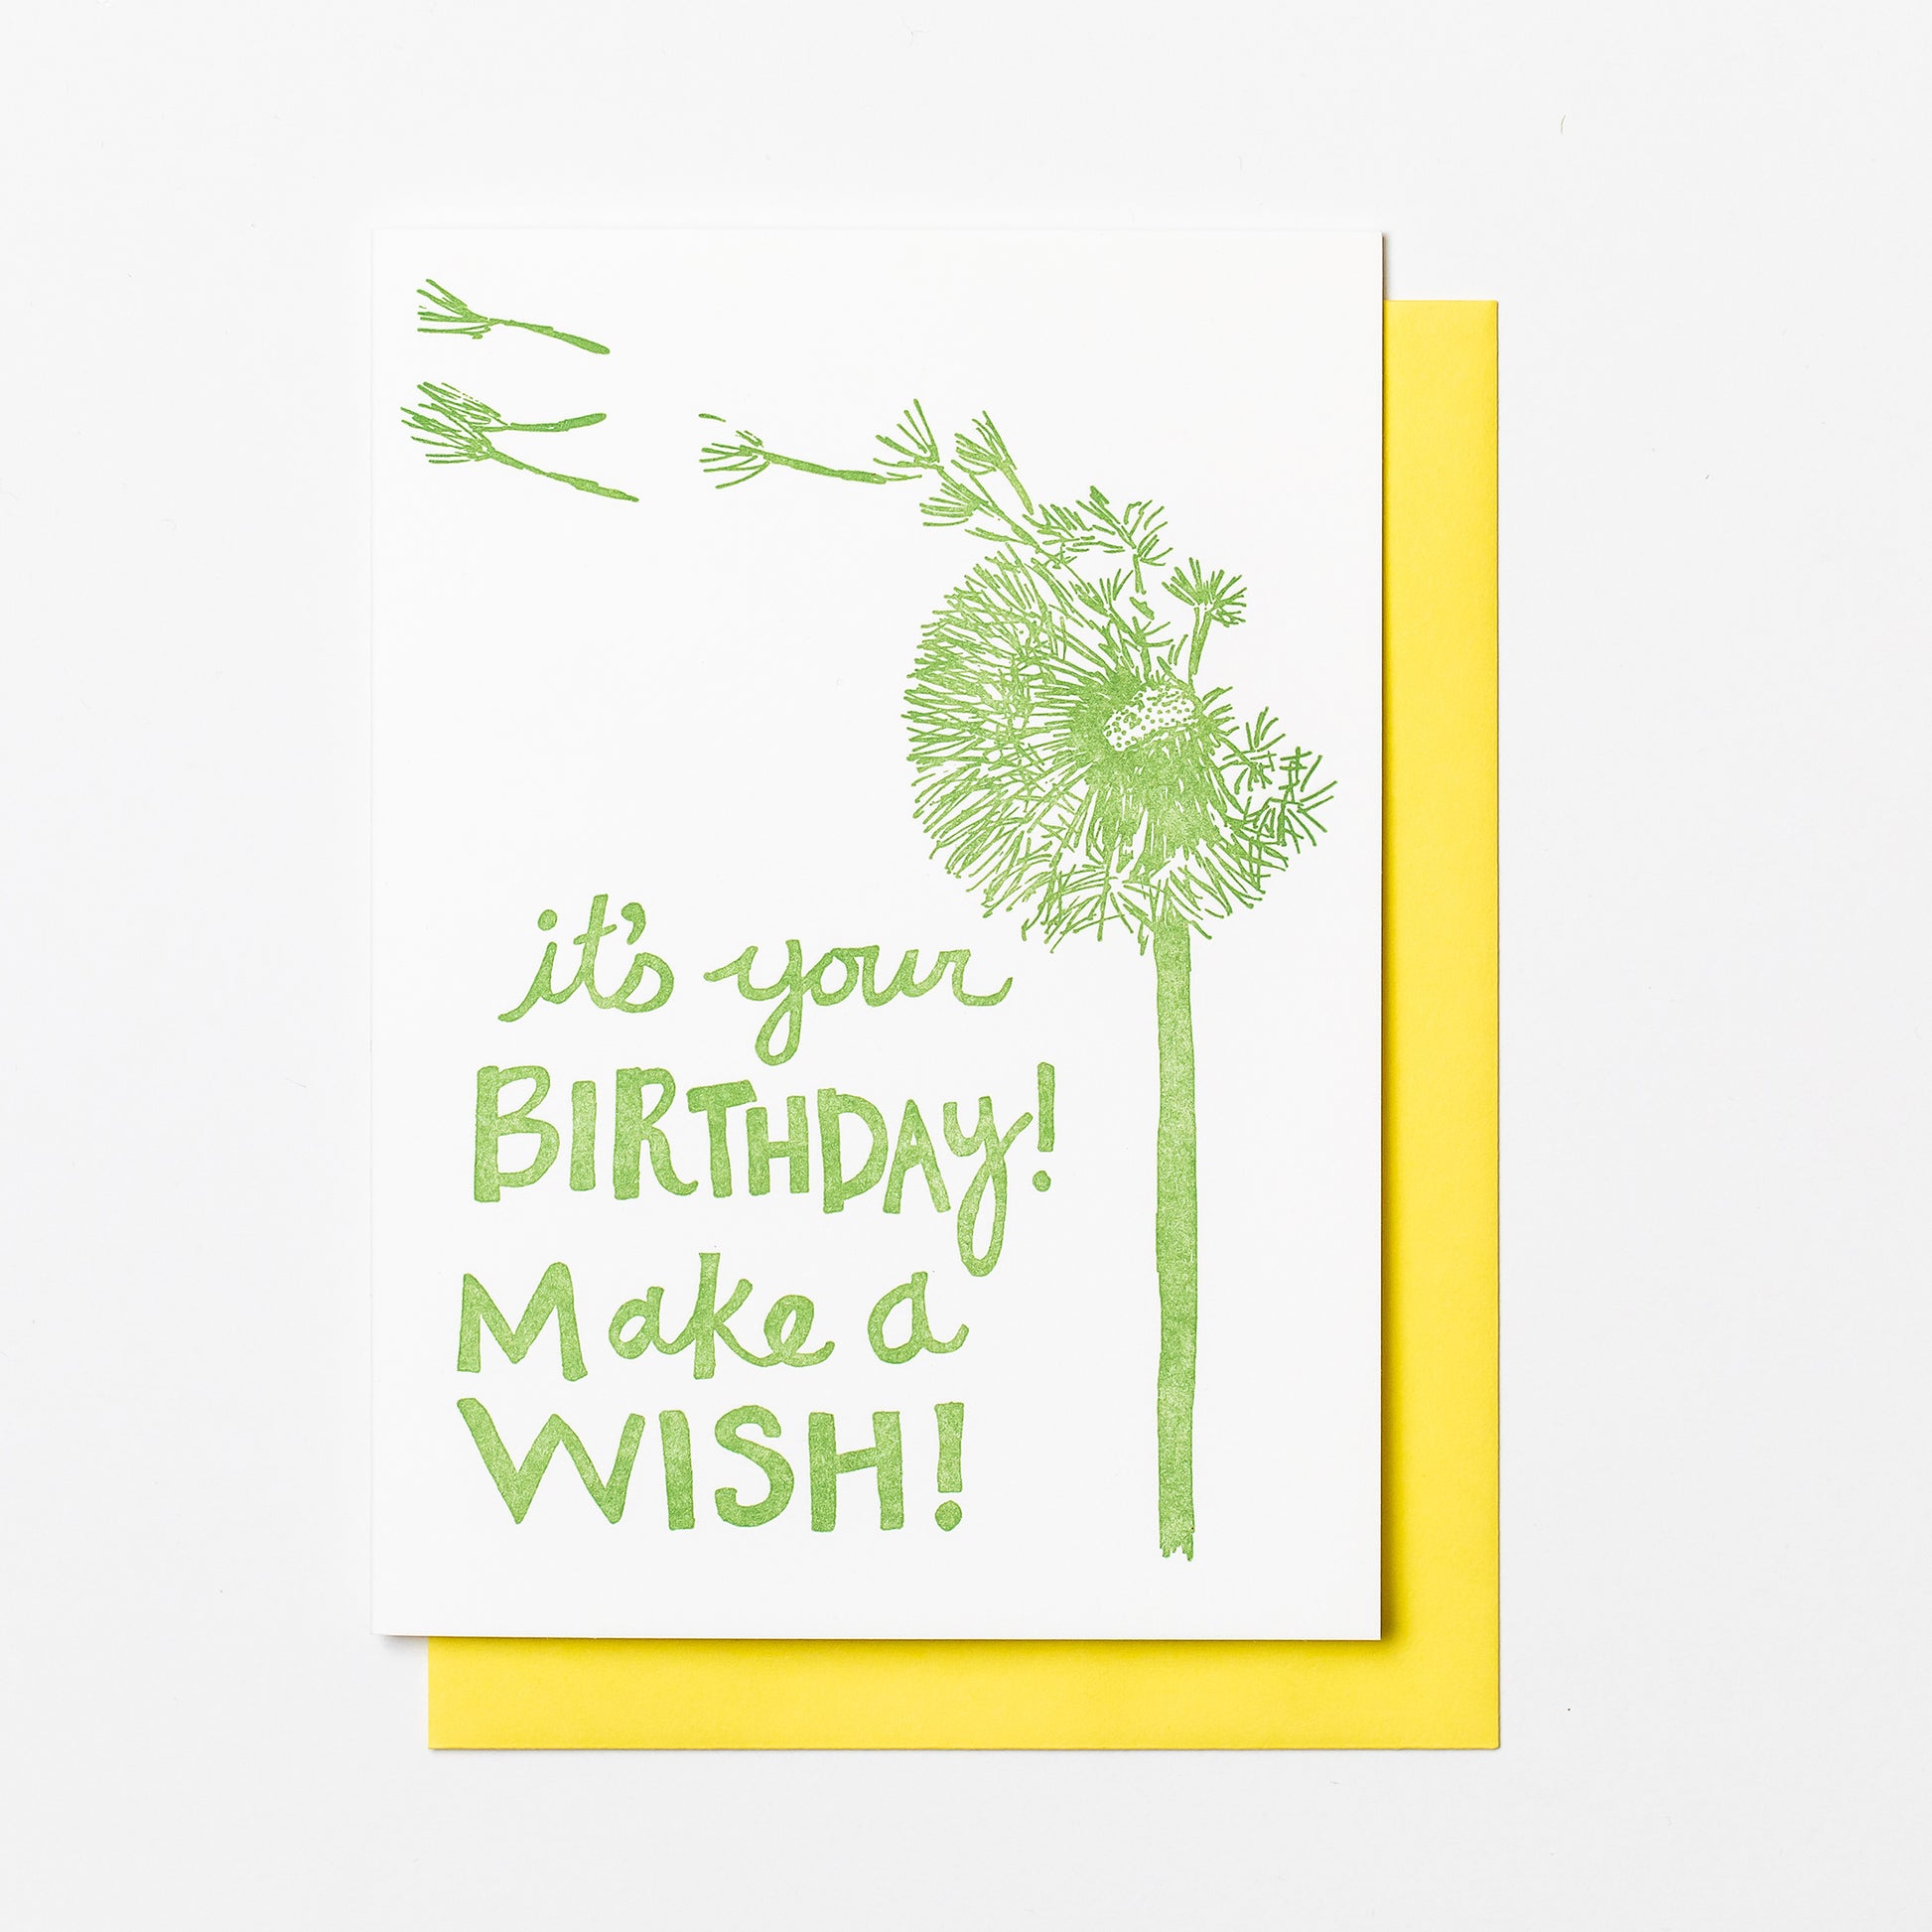 Letterpress greeting card featuring a hand-drawn dandelion printed in an earthy sage green ink. The bottom left of the card says "It's your birthday! Make a wish!" in a whimsical hand-drawn text, in the same earthy sage green ink. The card is white, blank inside, and is paired with a soft yellow envelope.